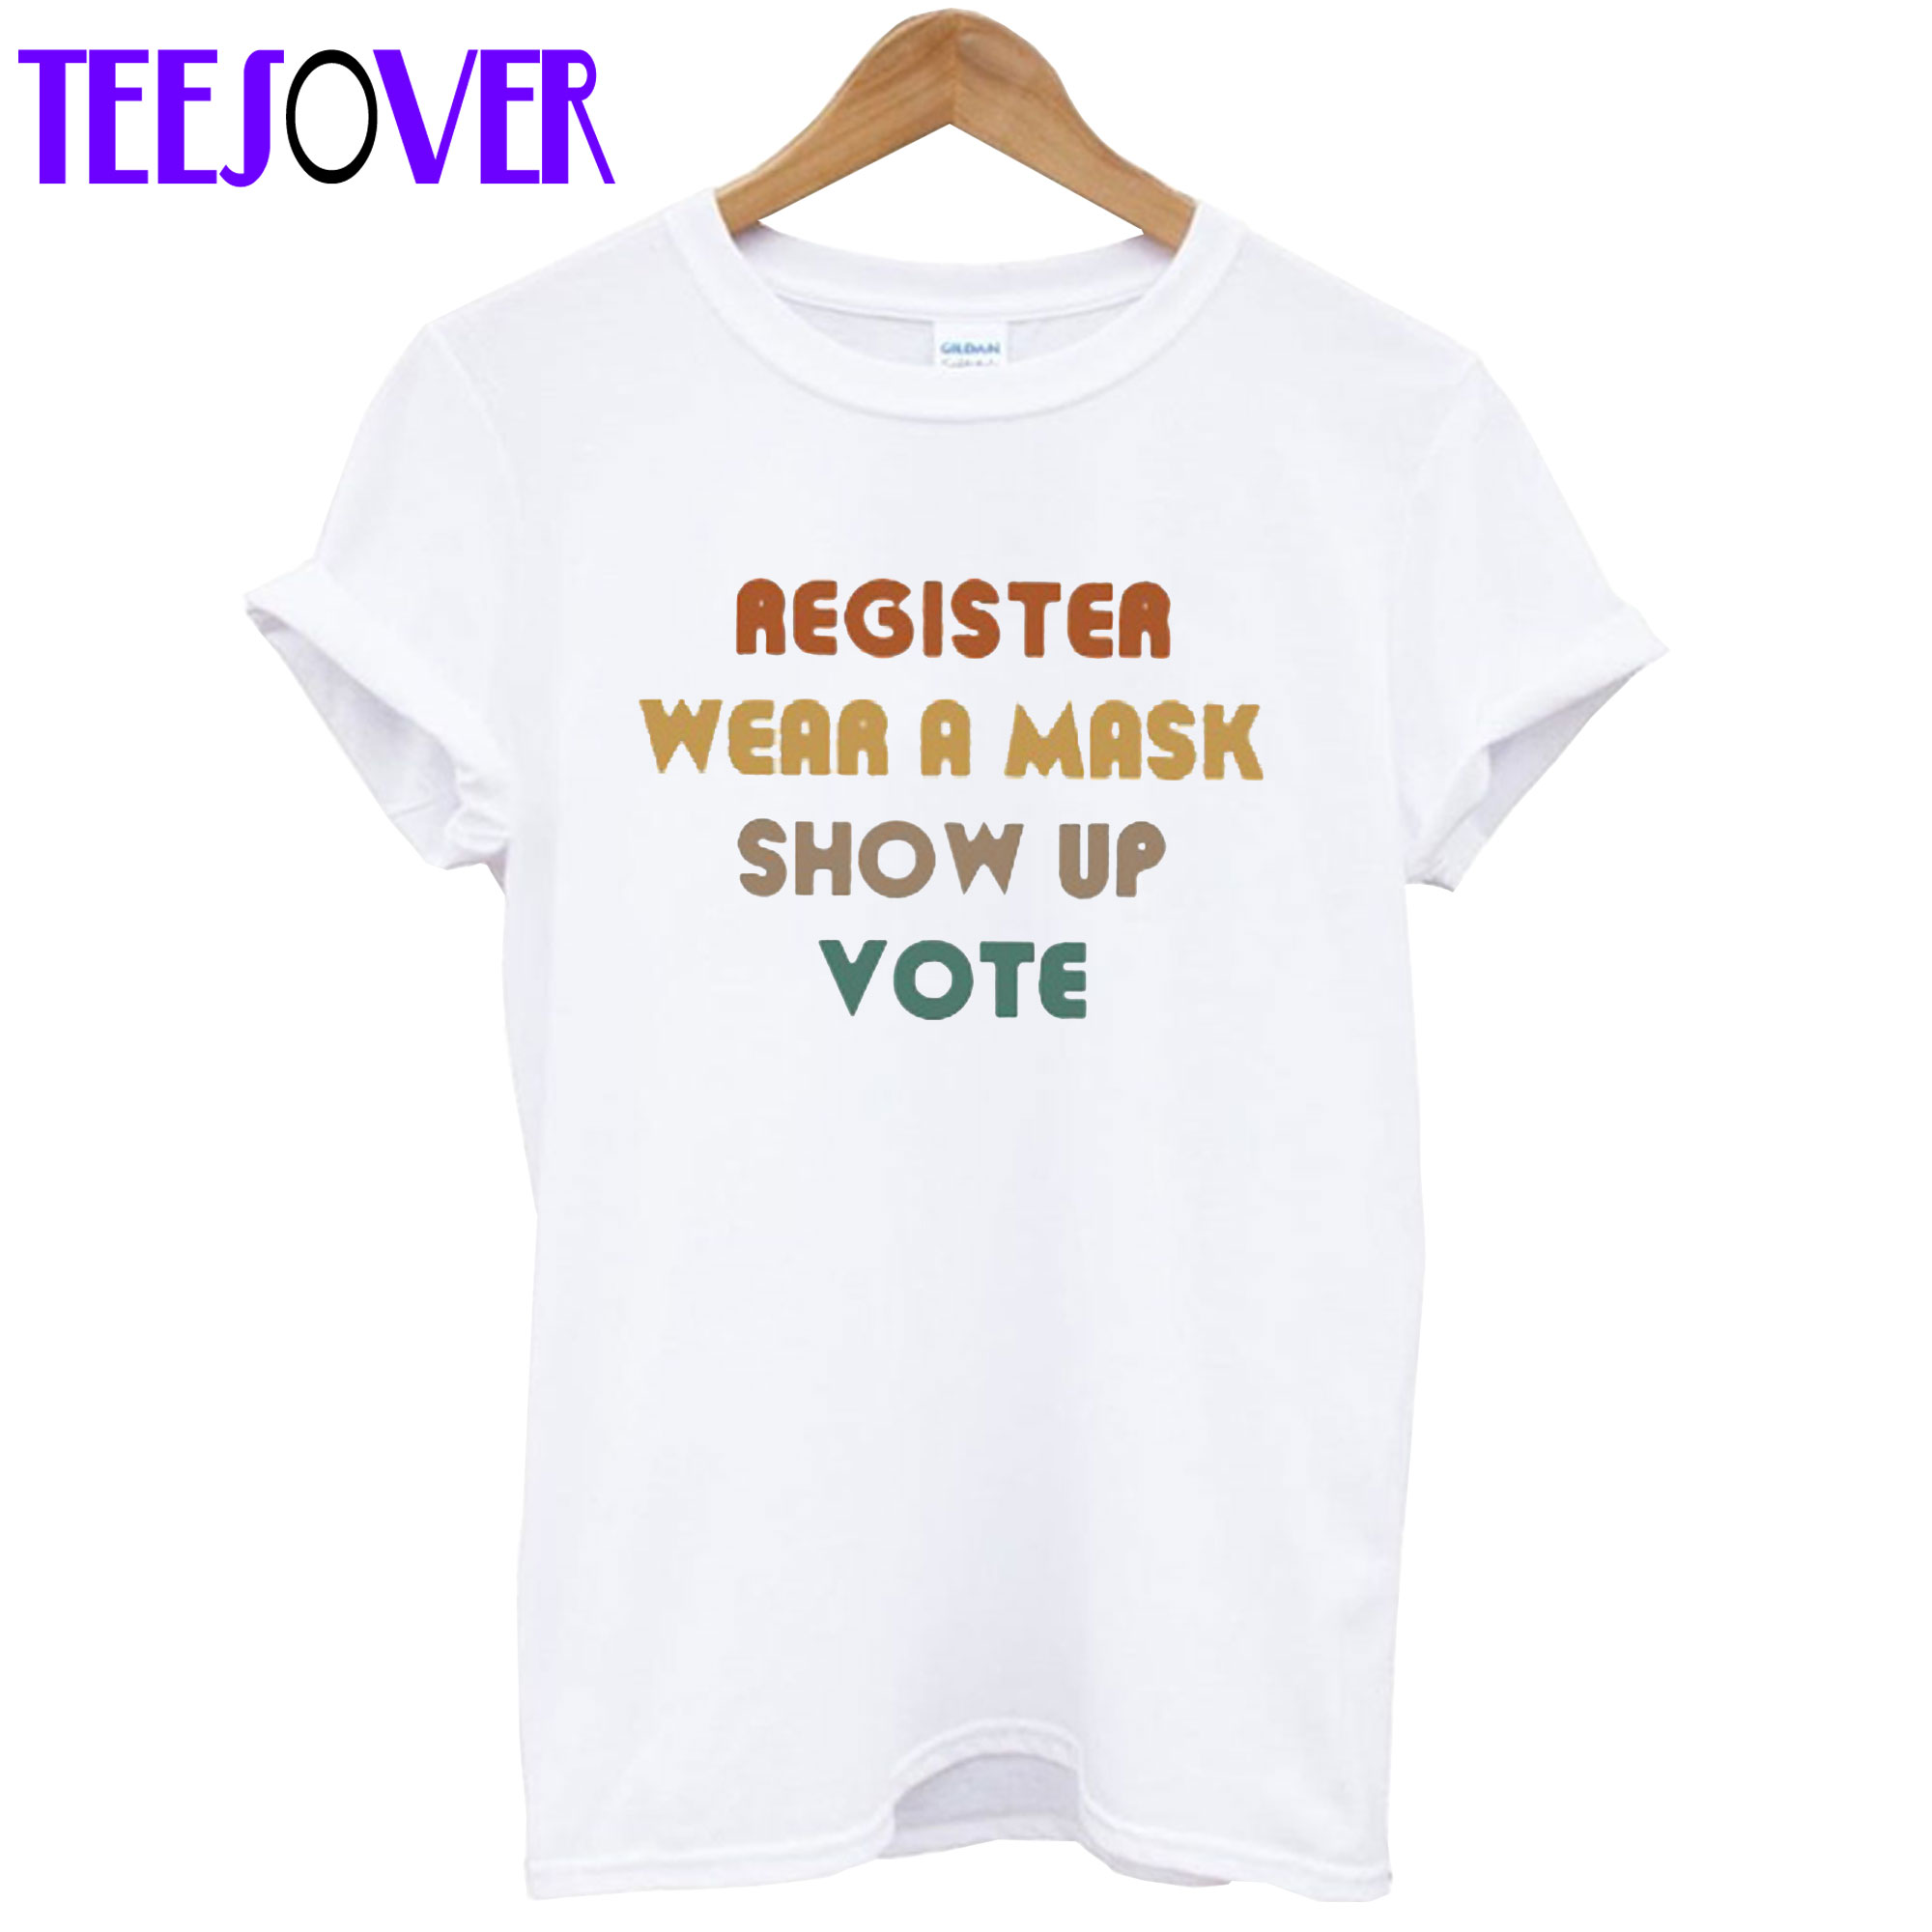 Can You Wear A Political Shirt To Vote T-Shirt